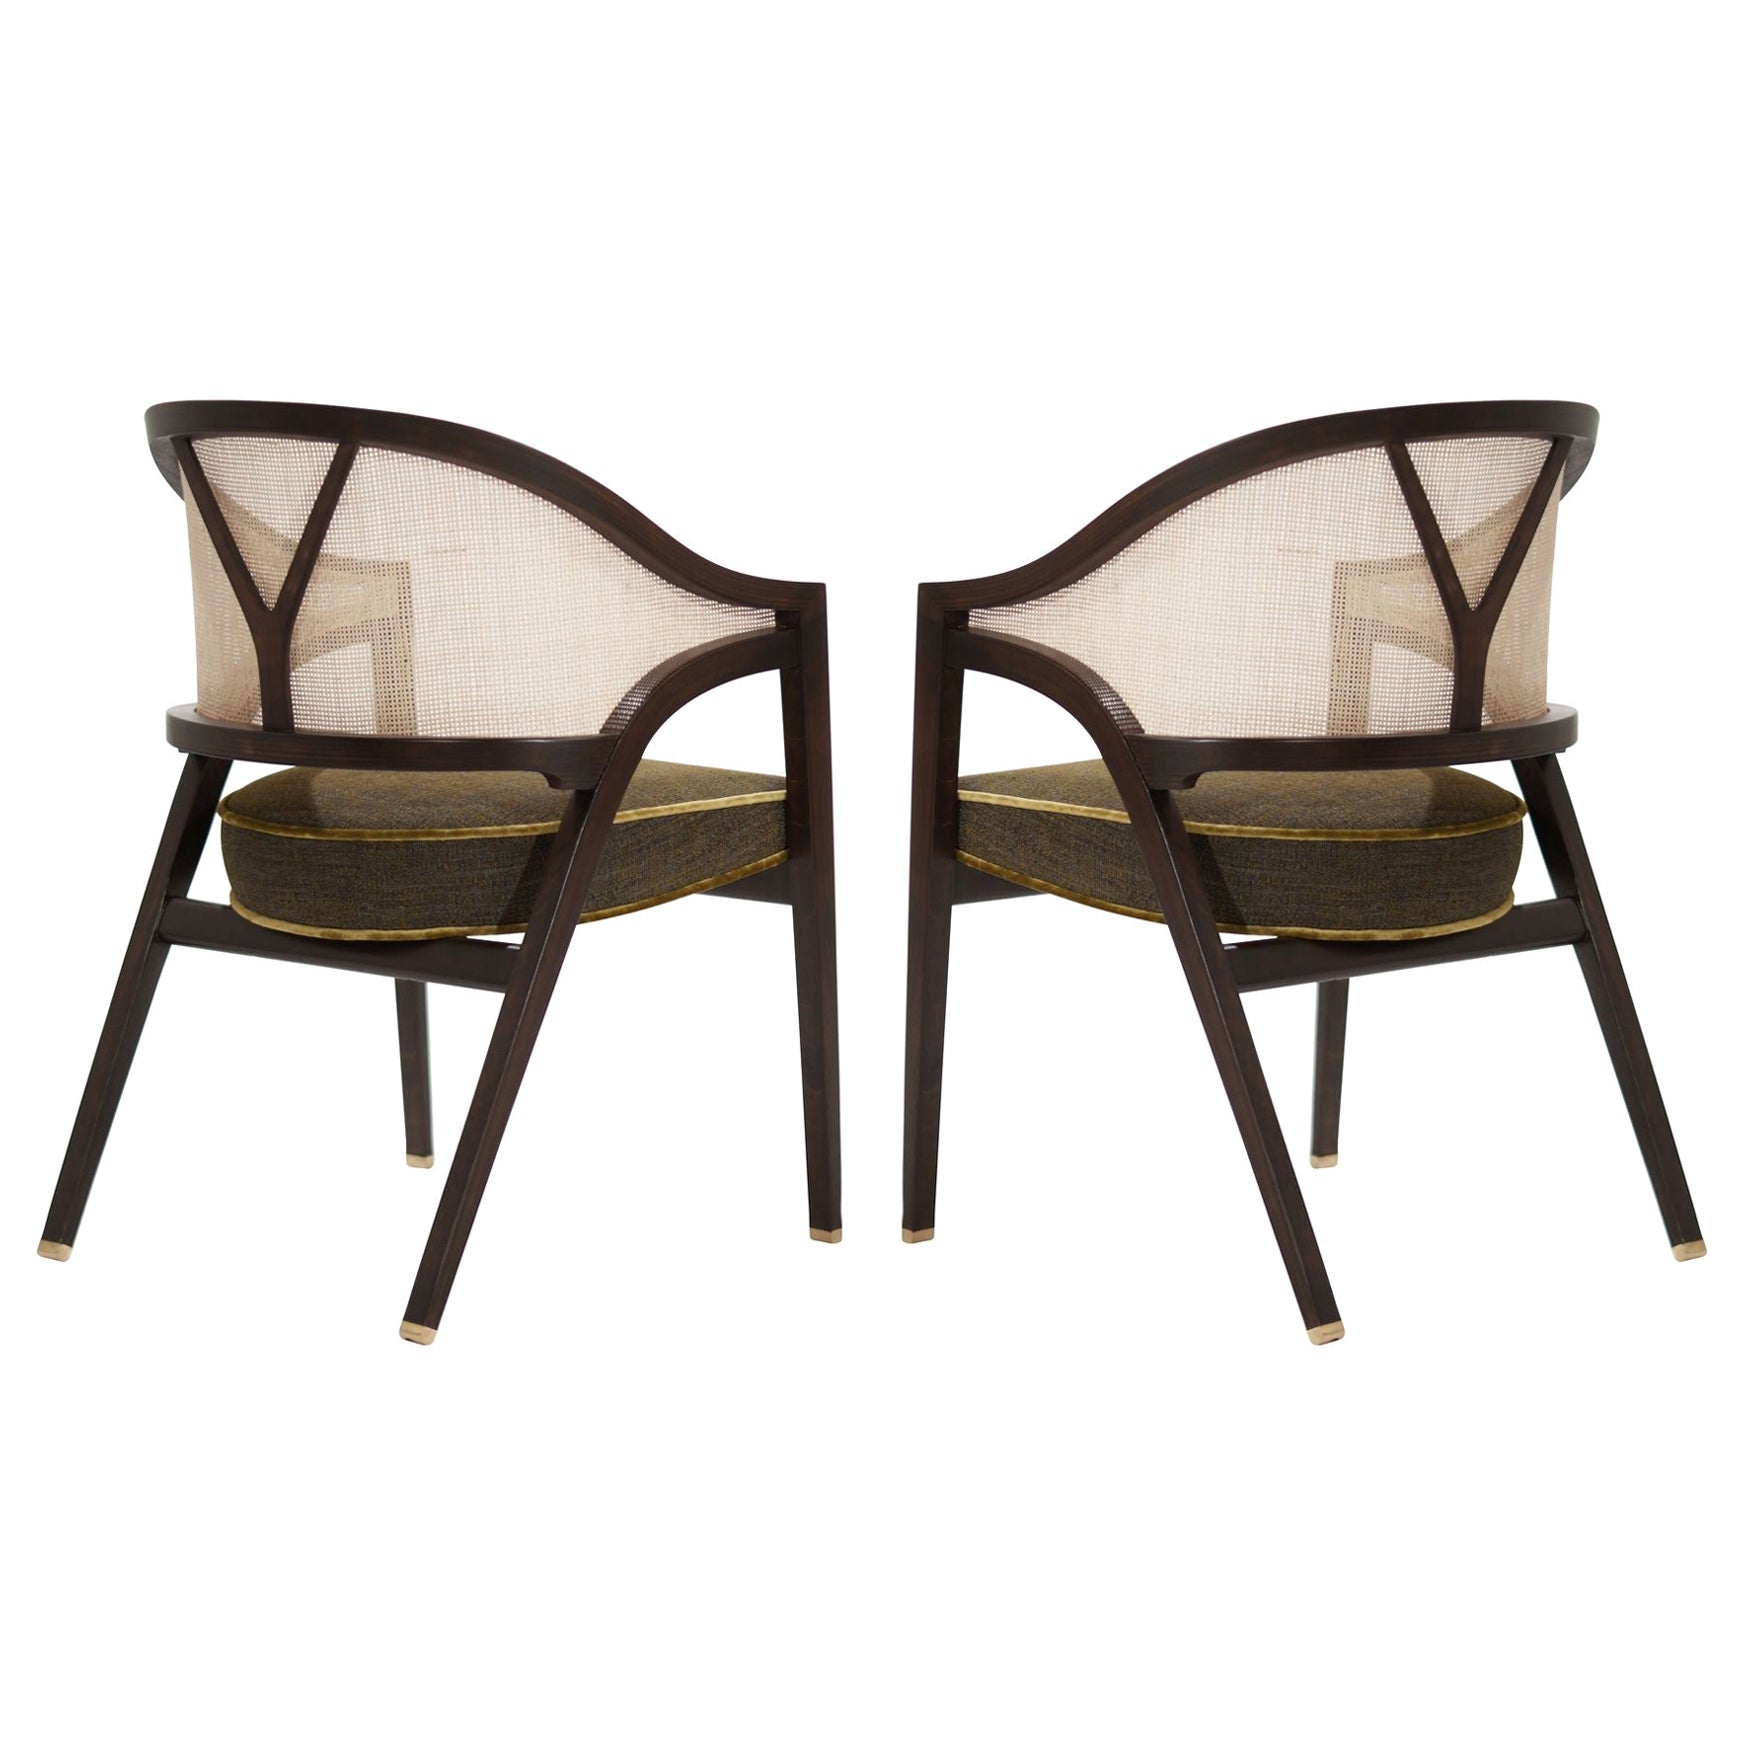 Set of "Y" Armchairs by Edward Wormley for Dunbar, C. 1950s